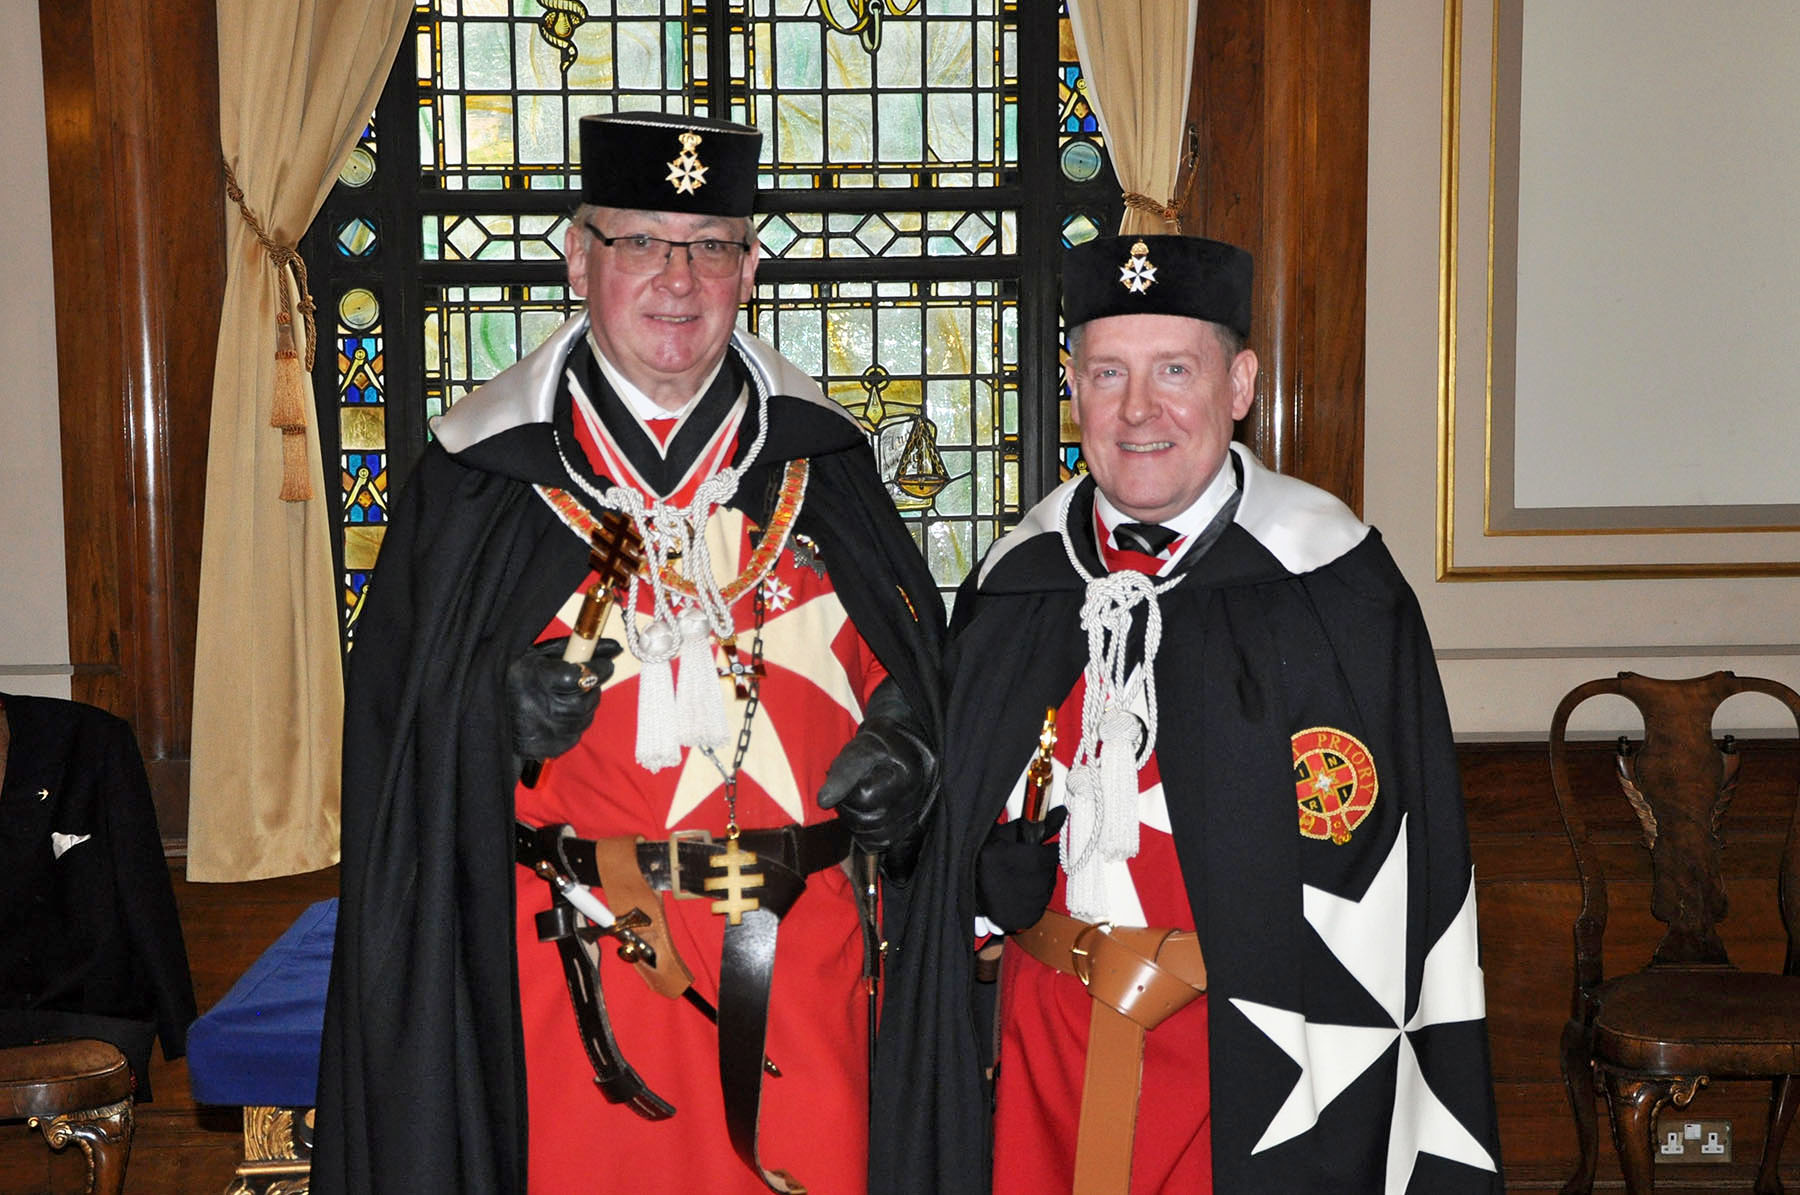 The Annual Meeting of the Great Priory of Malta